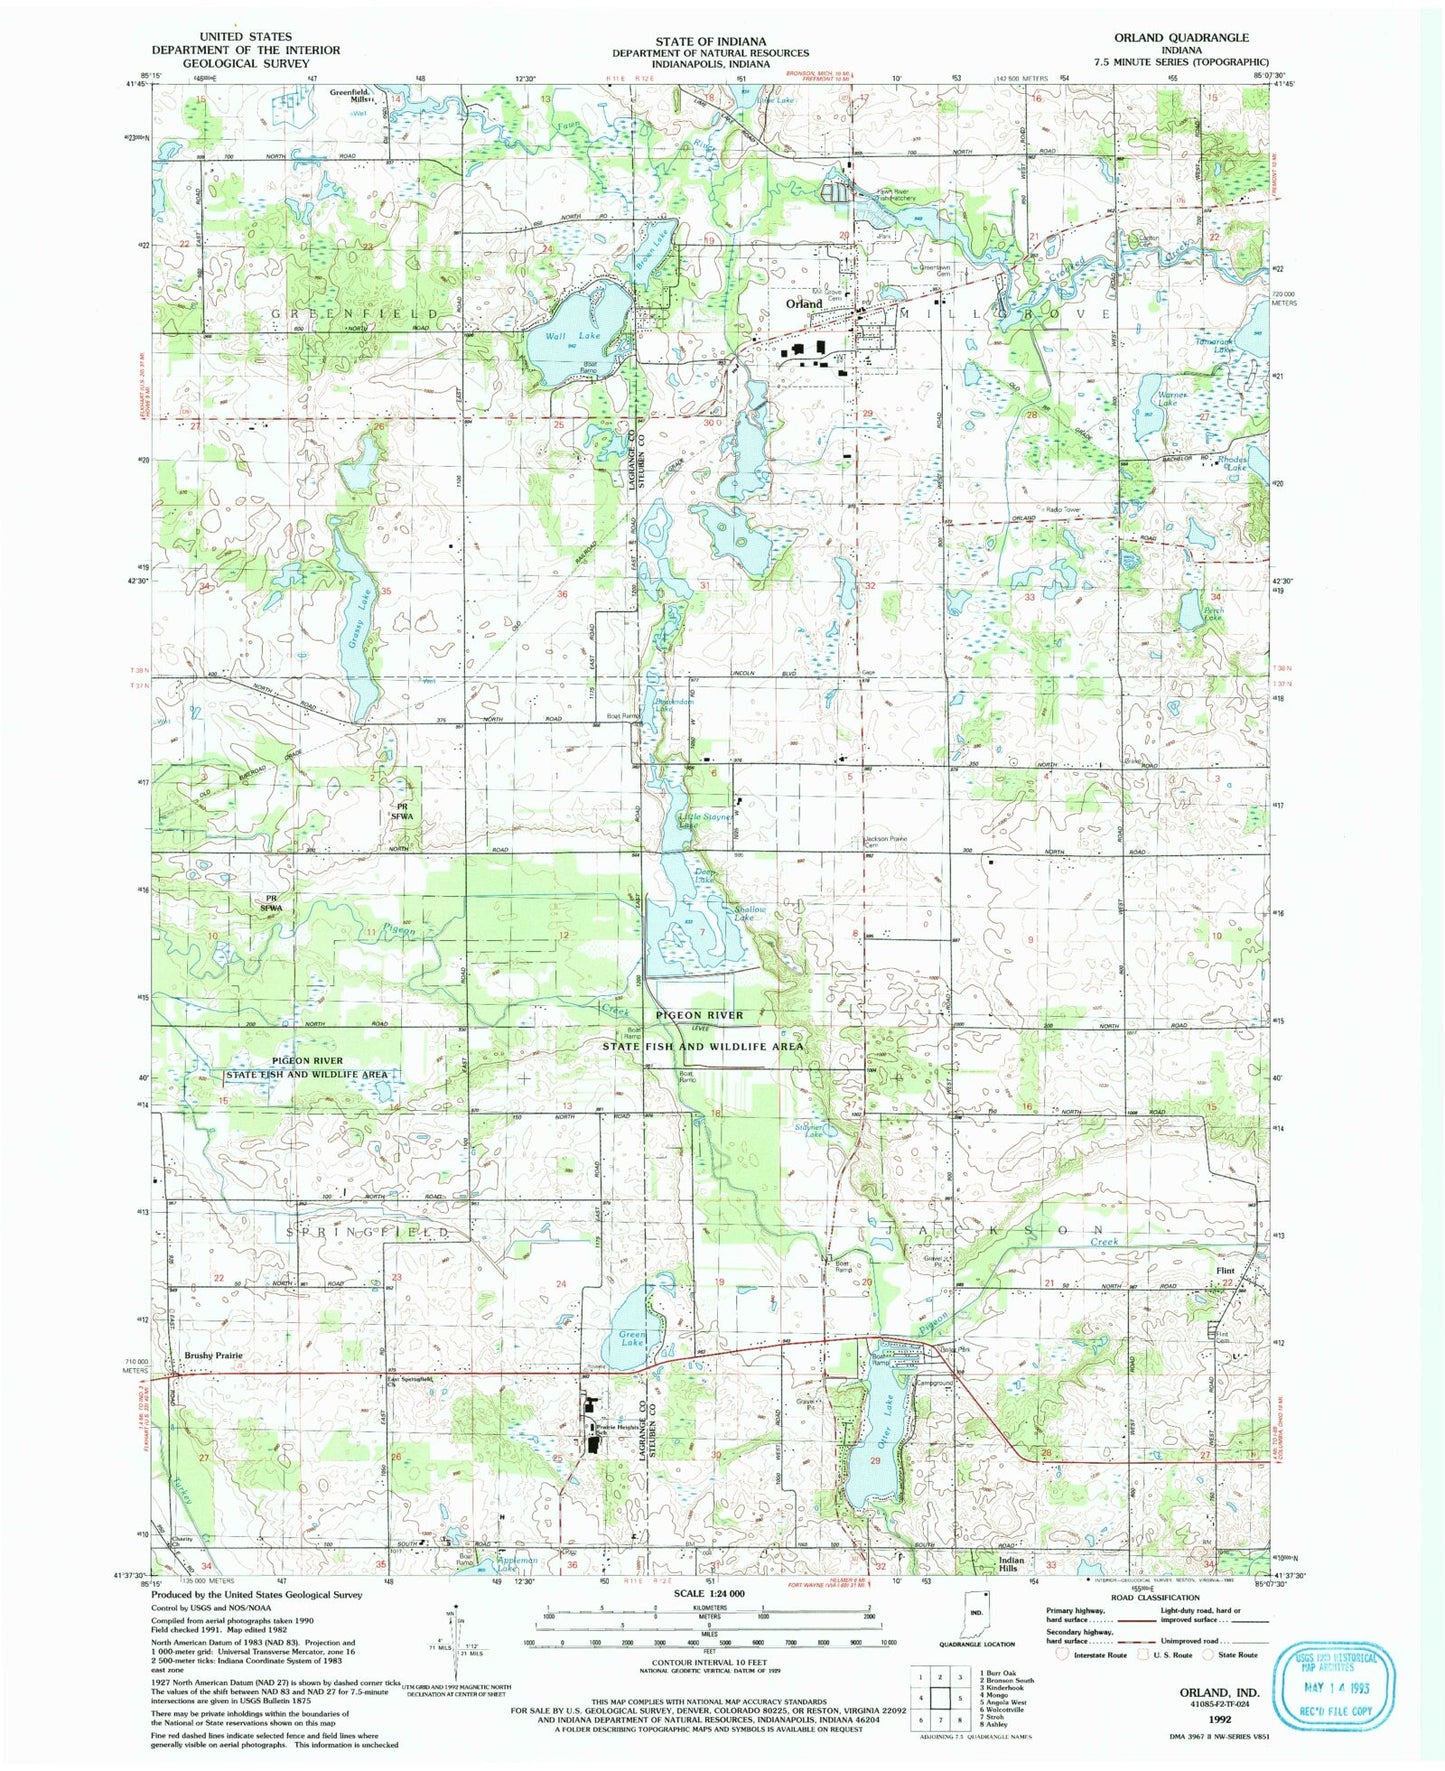 Classic USGS Orland Indiana 7.5'x7.5' Topo Map Image